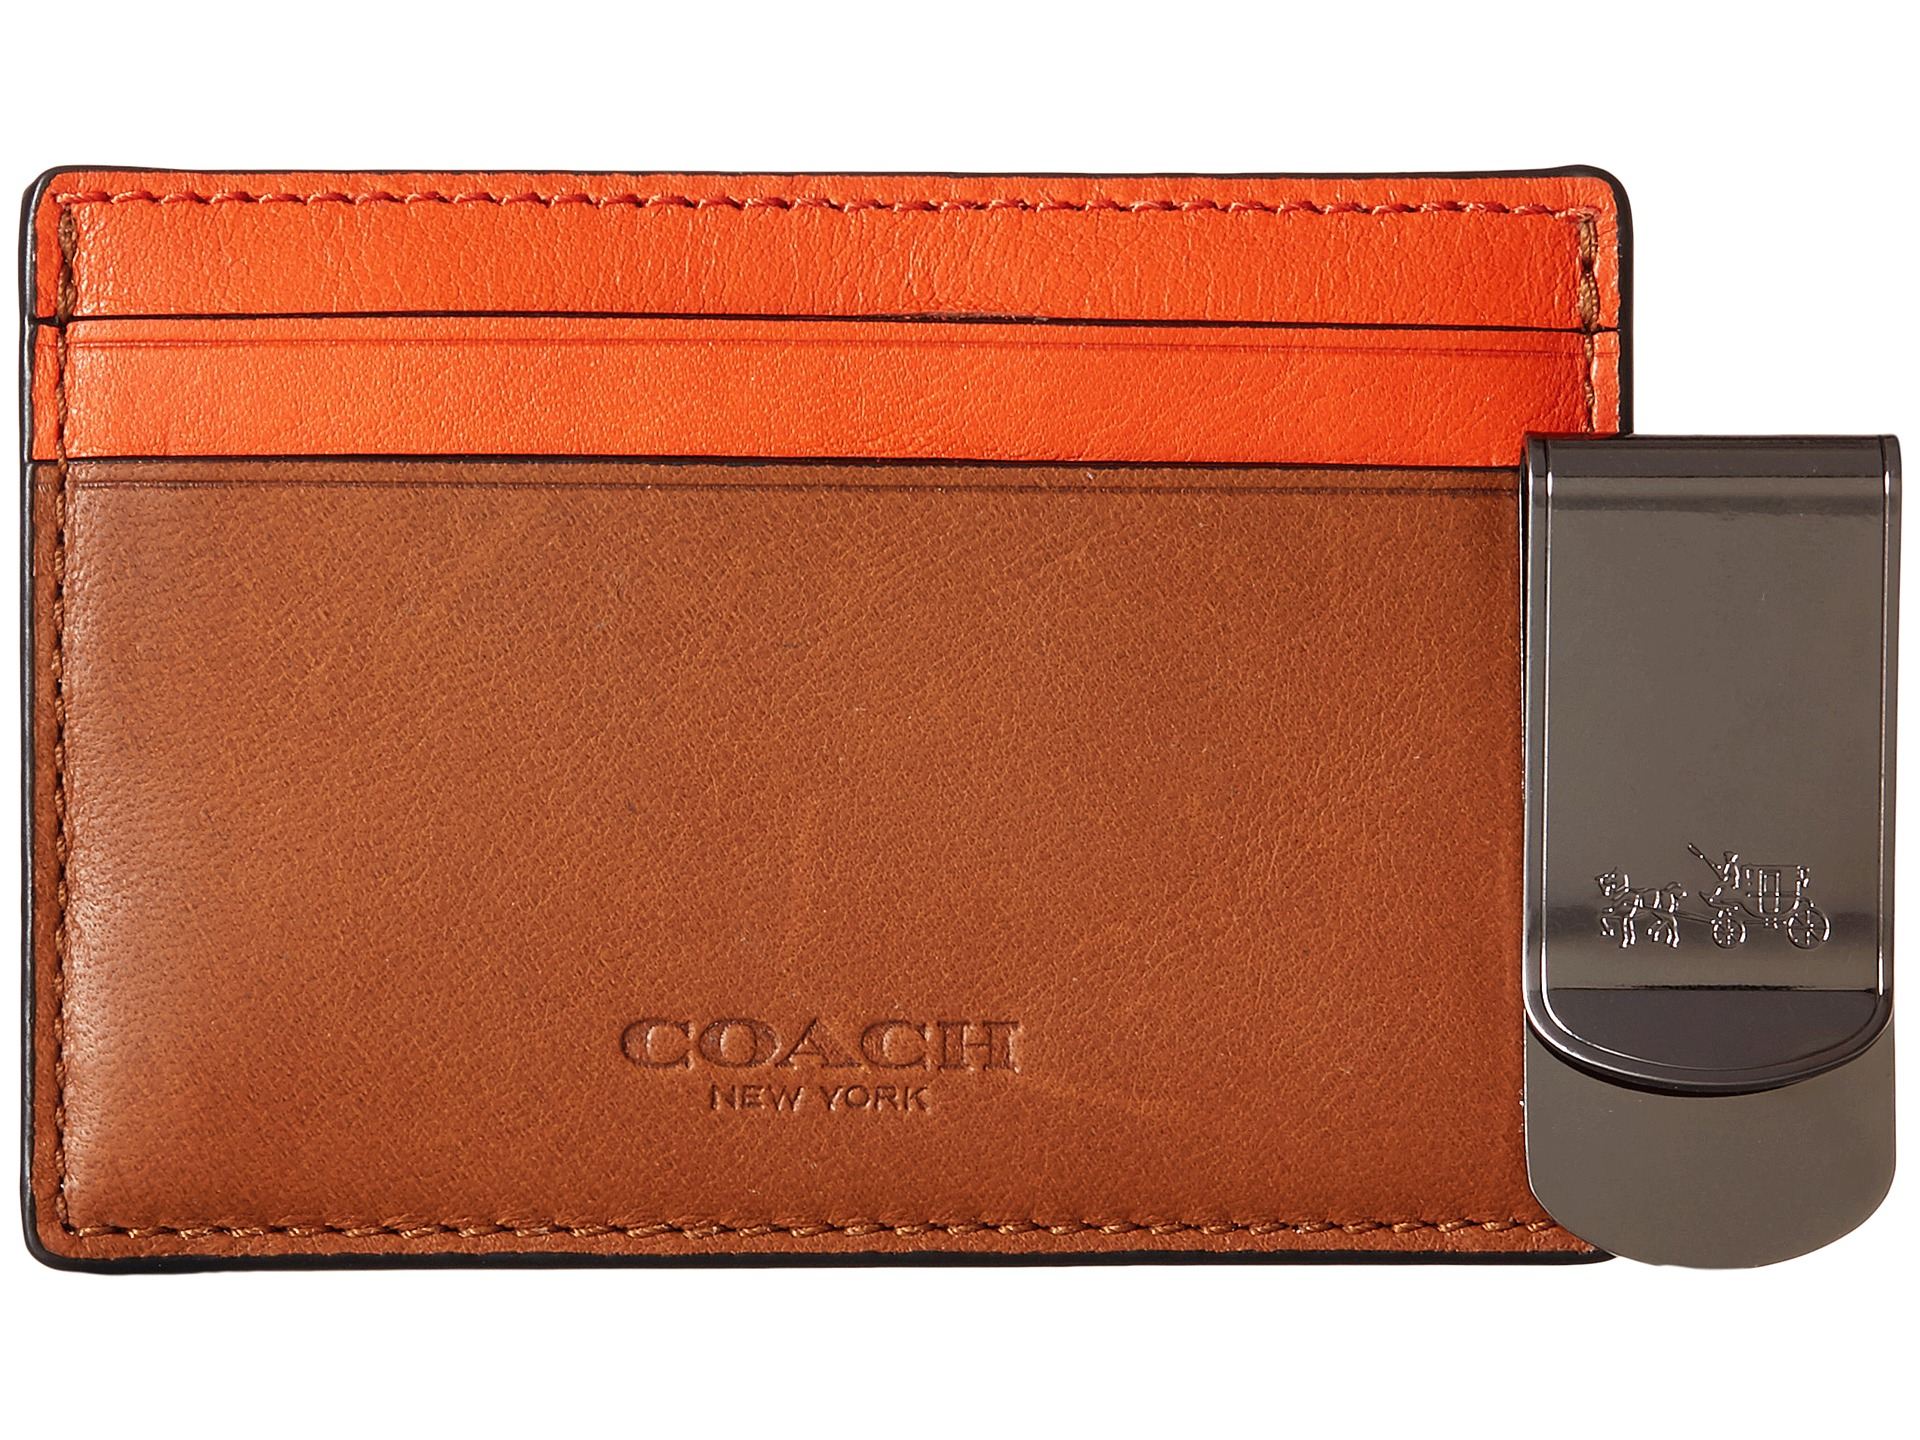 Coach Card case with logo, Men's Accessories